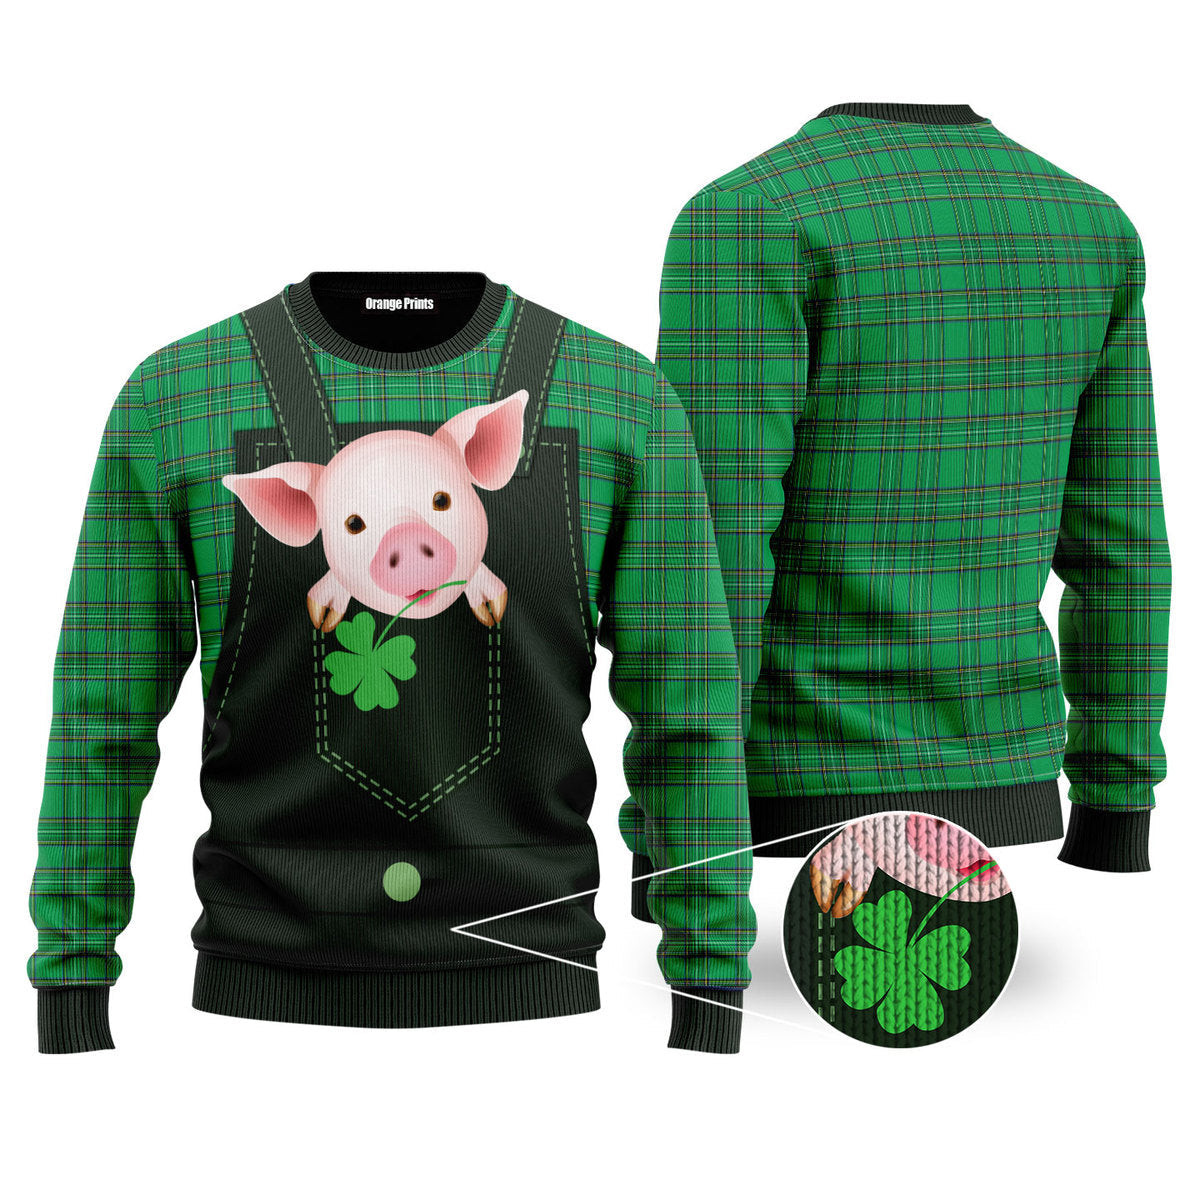 Pig Farm St Patricks Day Ugly Christmas Sweater Ugly Sweater For Men Women